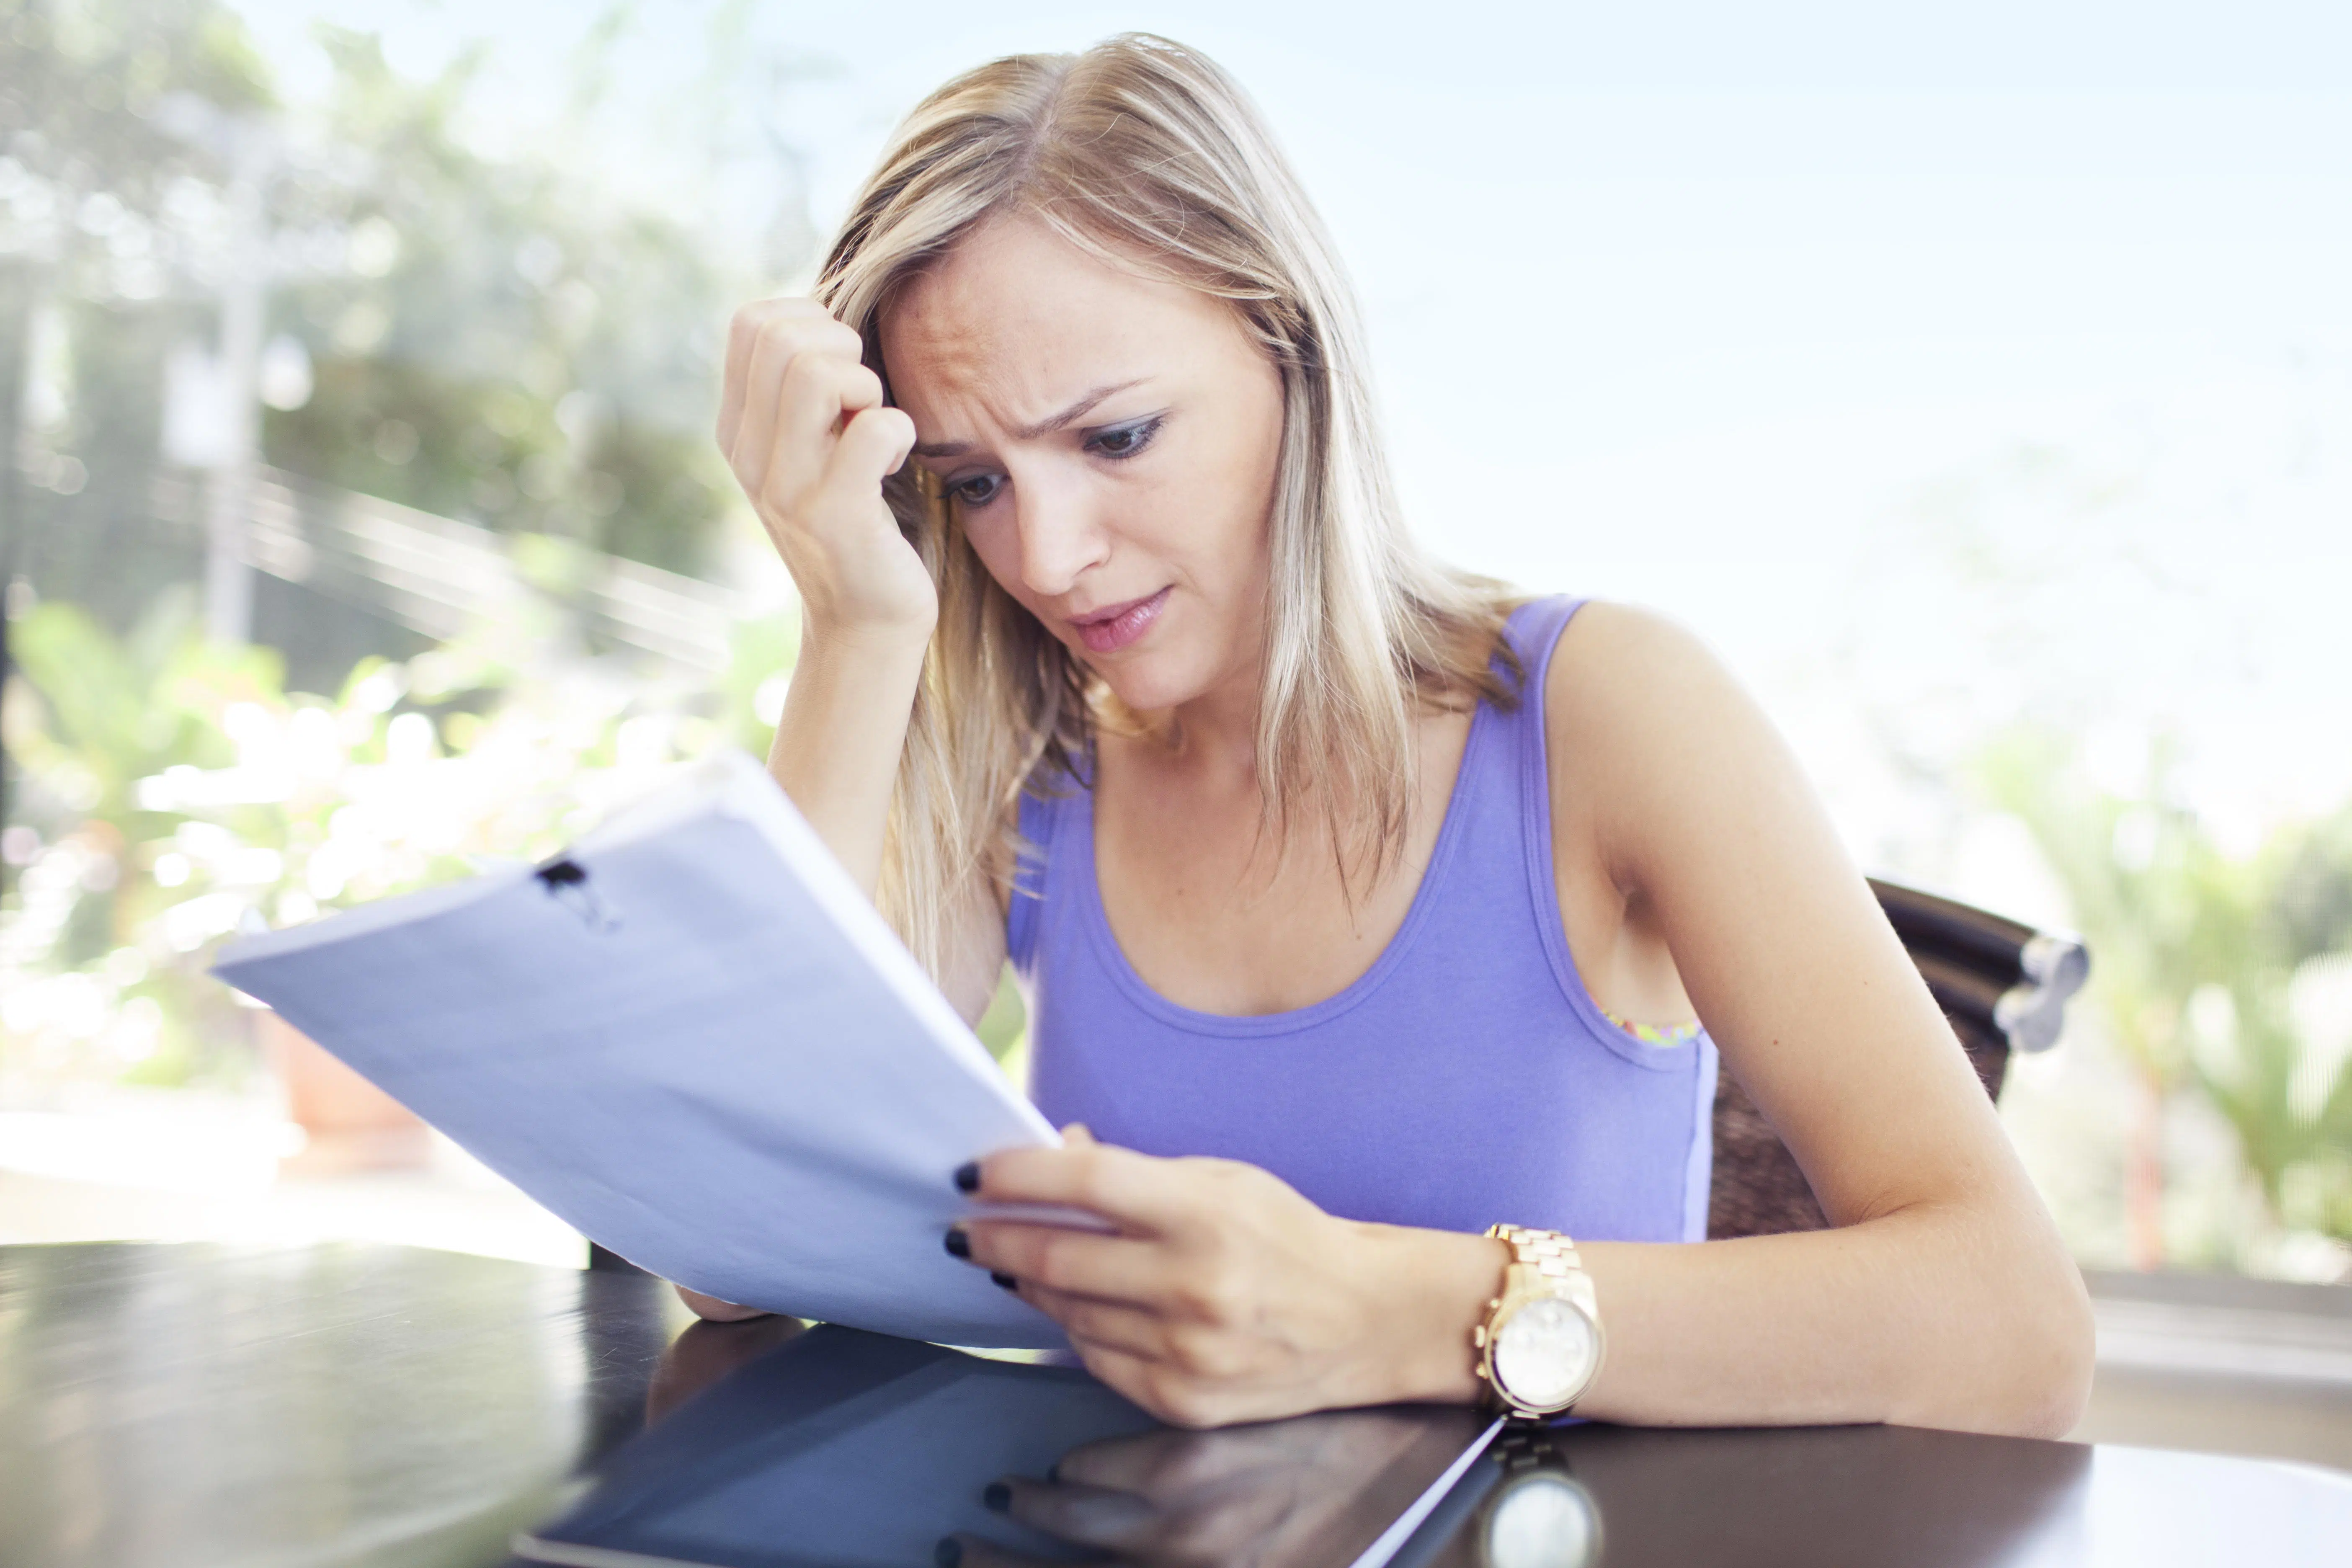 Luckily, Florida consumers with errors on their credit reports don’t have to wait for the credit bureaus to fix flawed credit reporting polices.